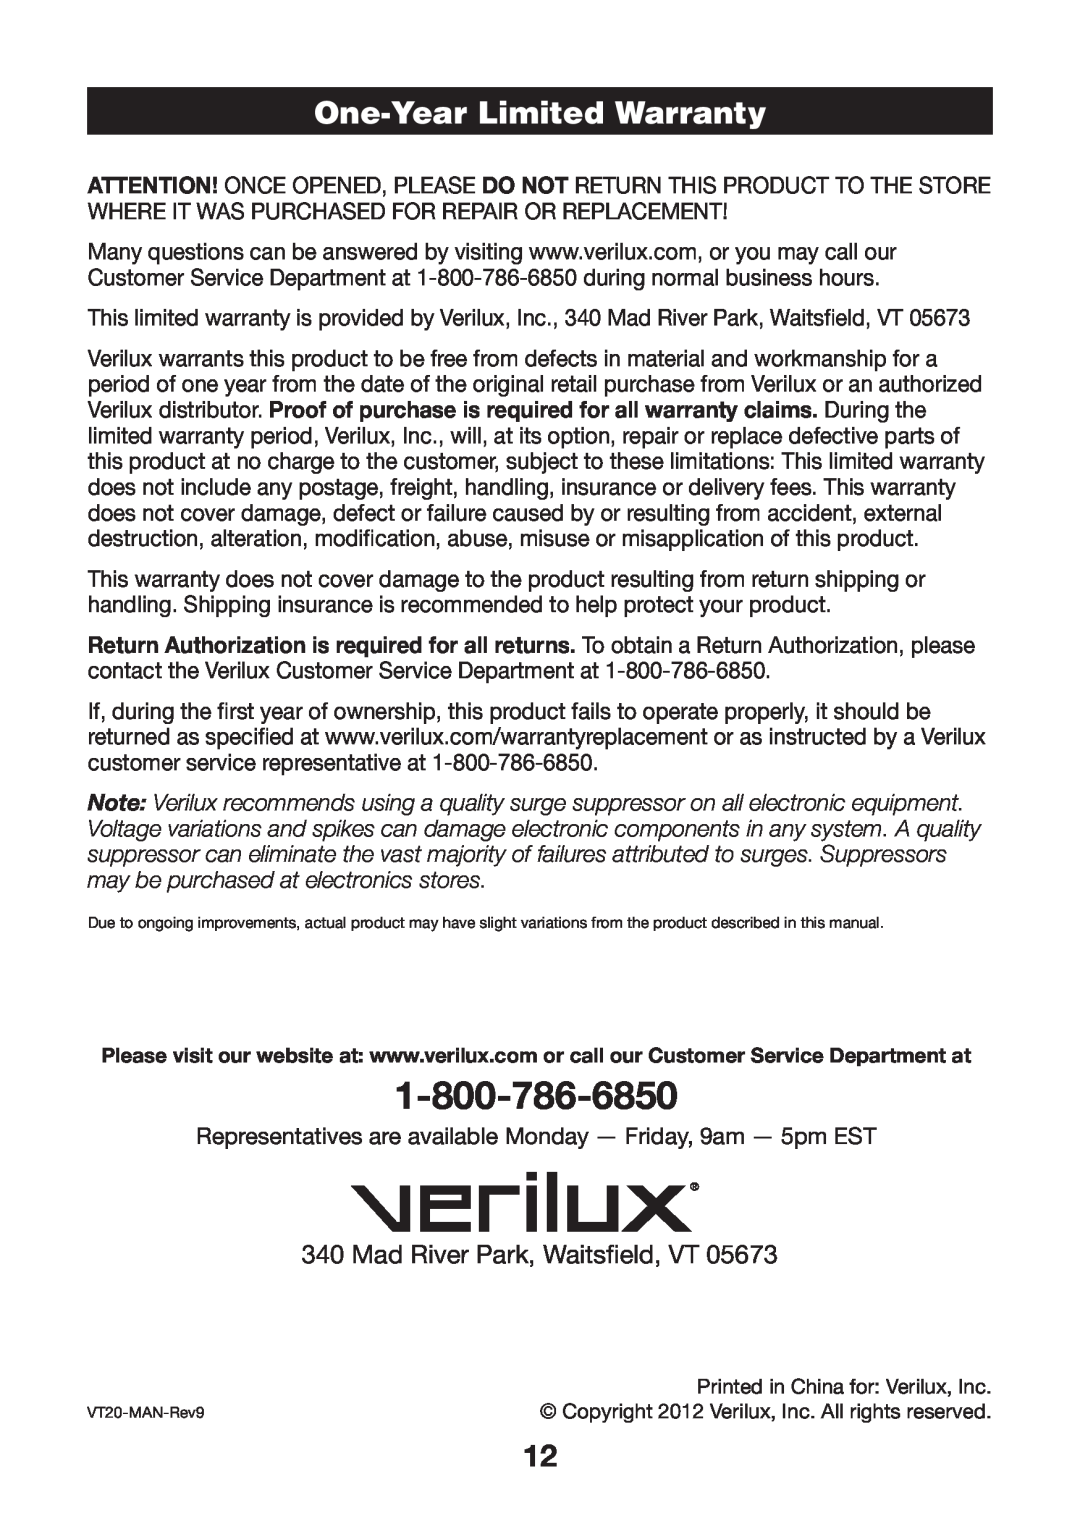 Verilux vt20 manual One-YearLimited Warranty, Mad River Park, Waitsfield, VT 